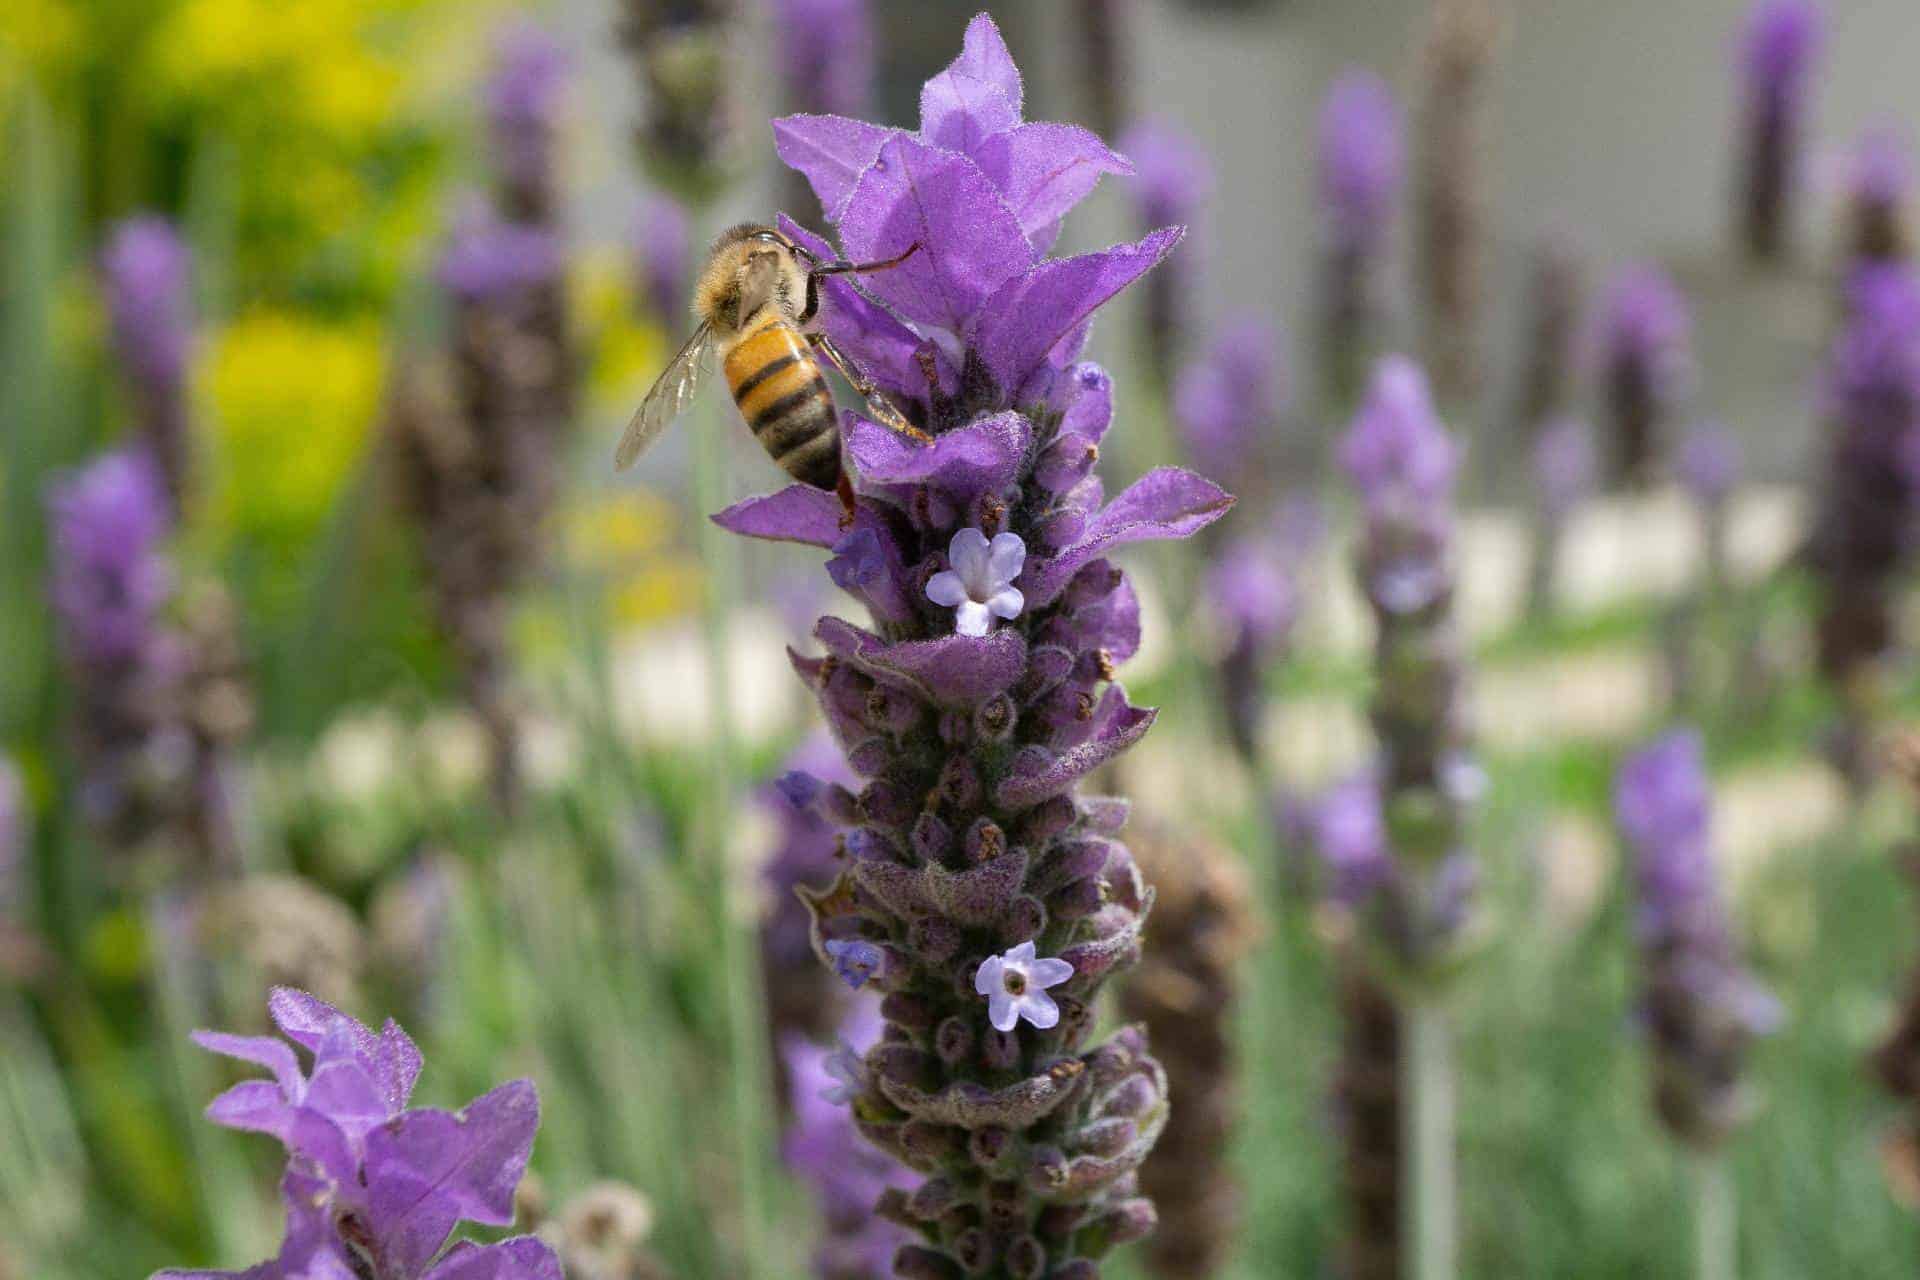 Why do bees love lavender so much?